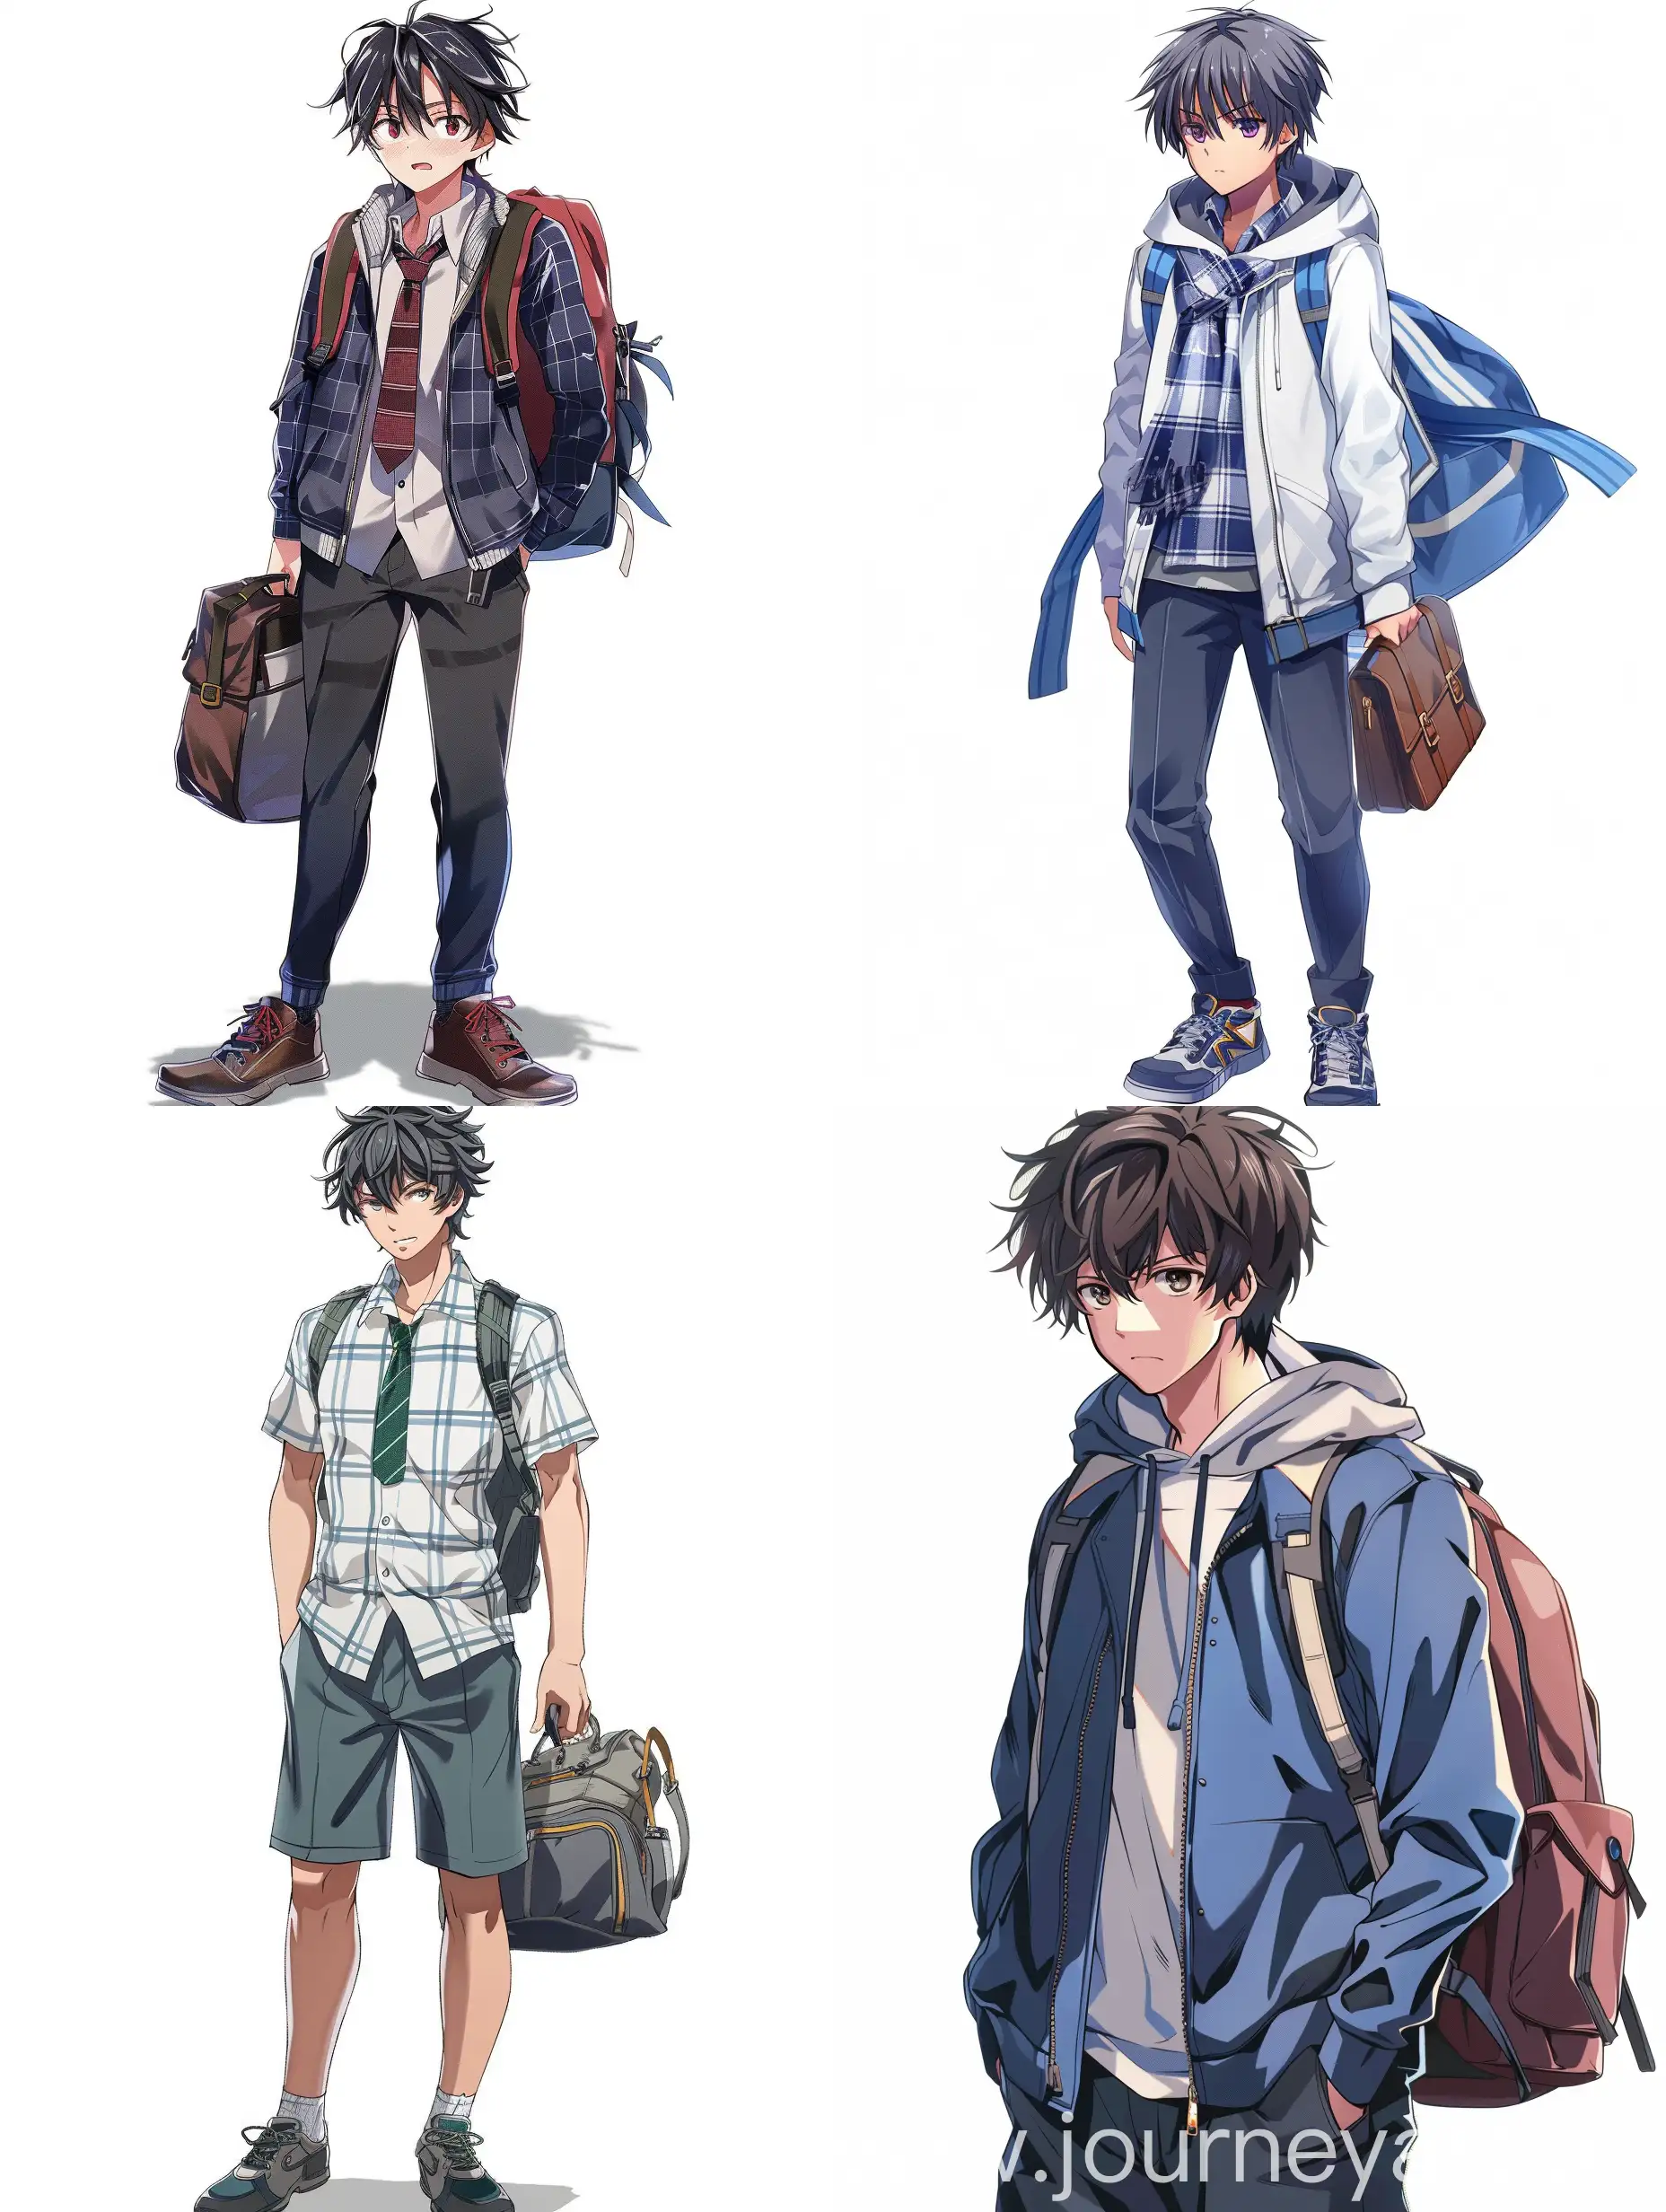 hero in isekai with college outfit
